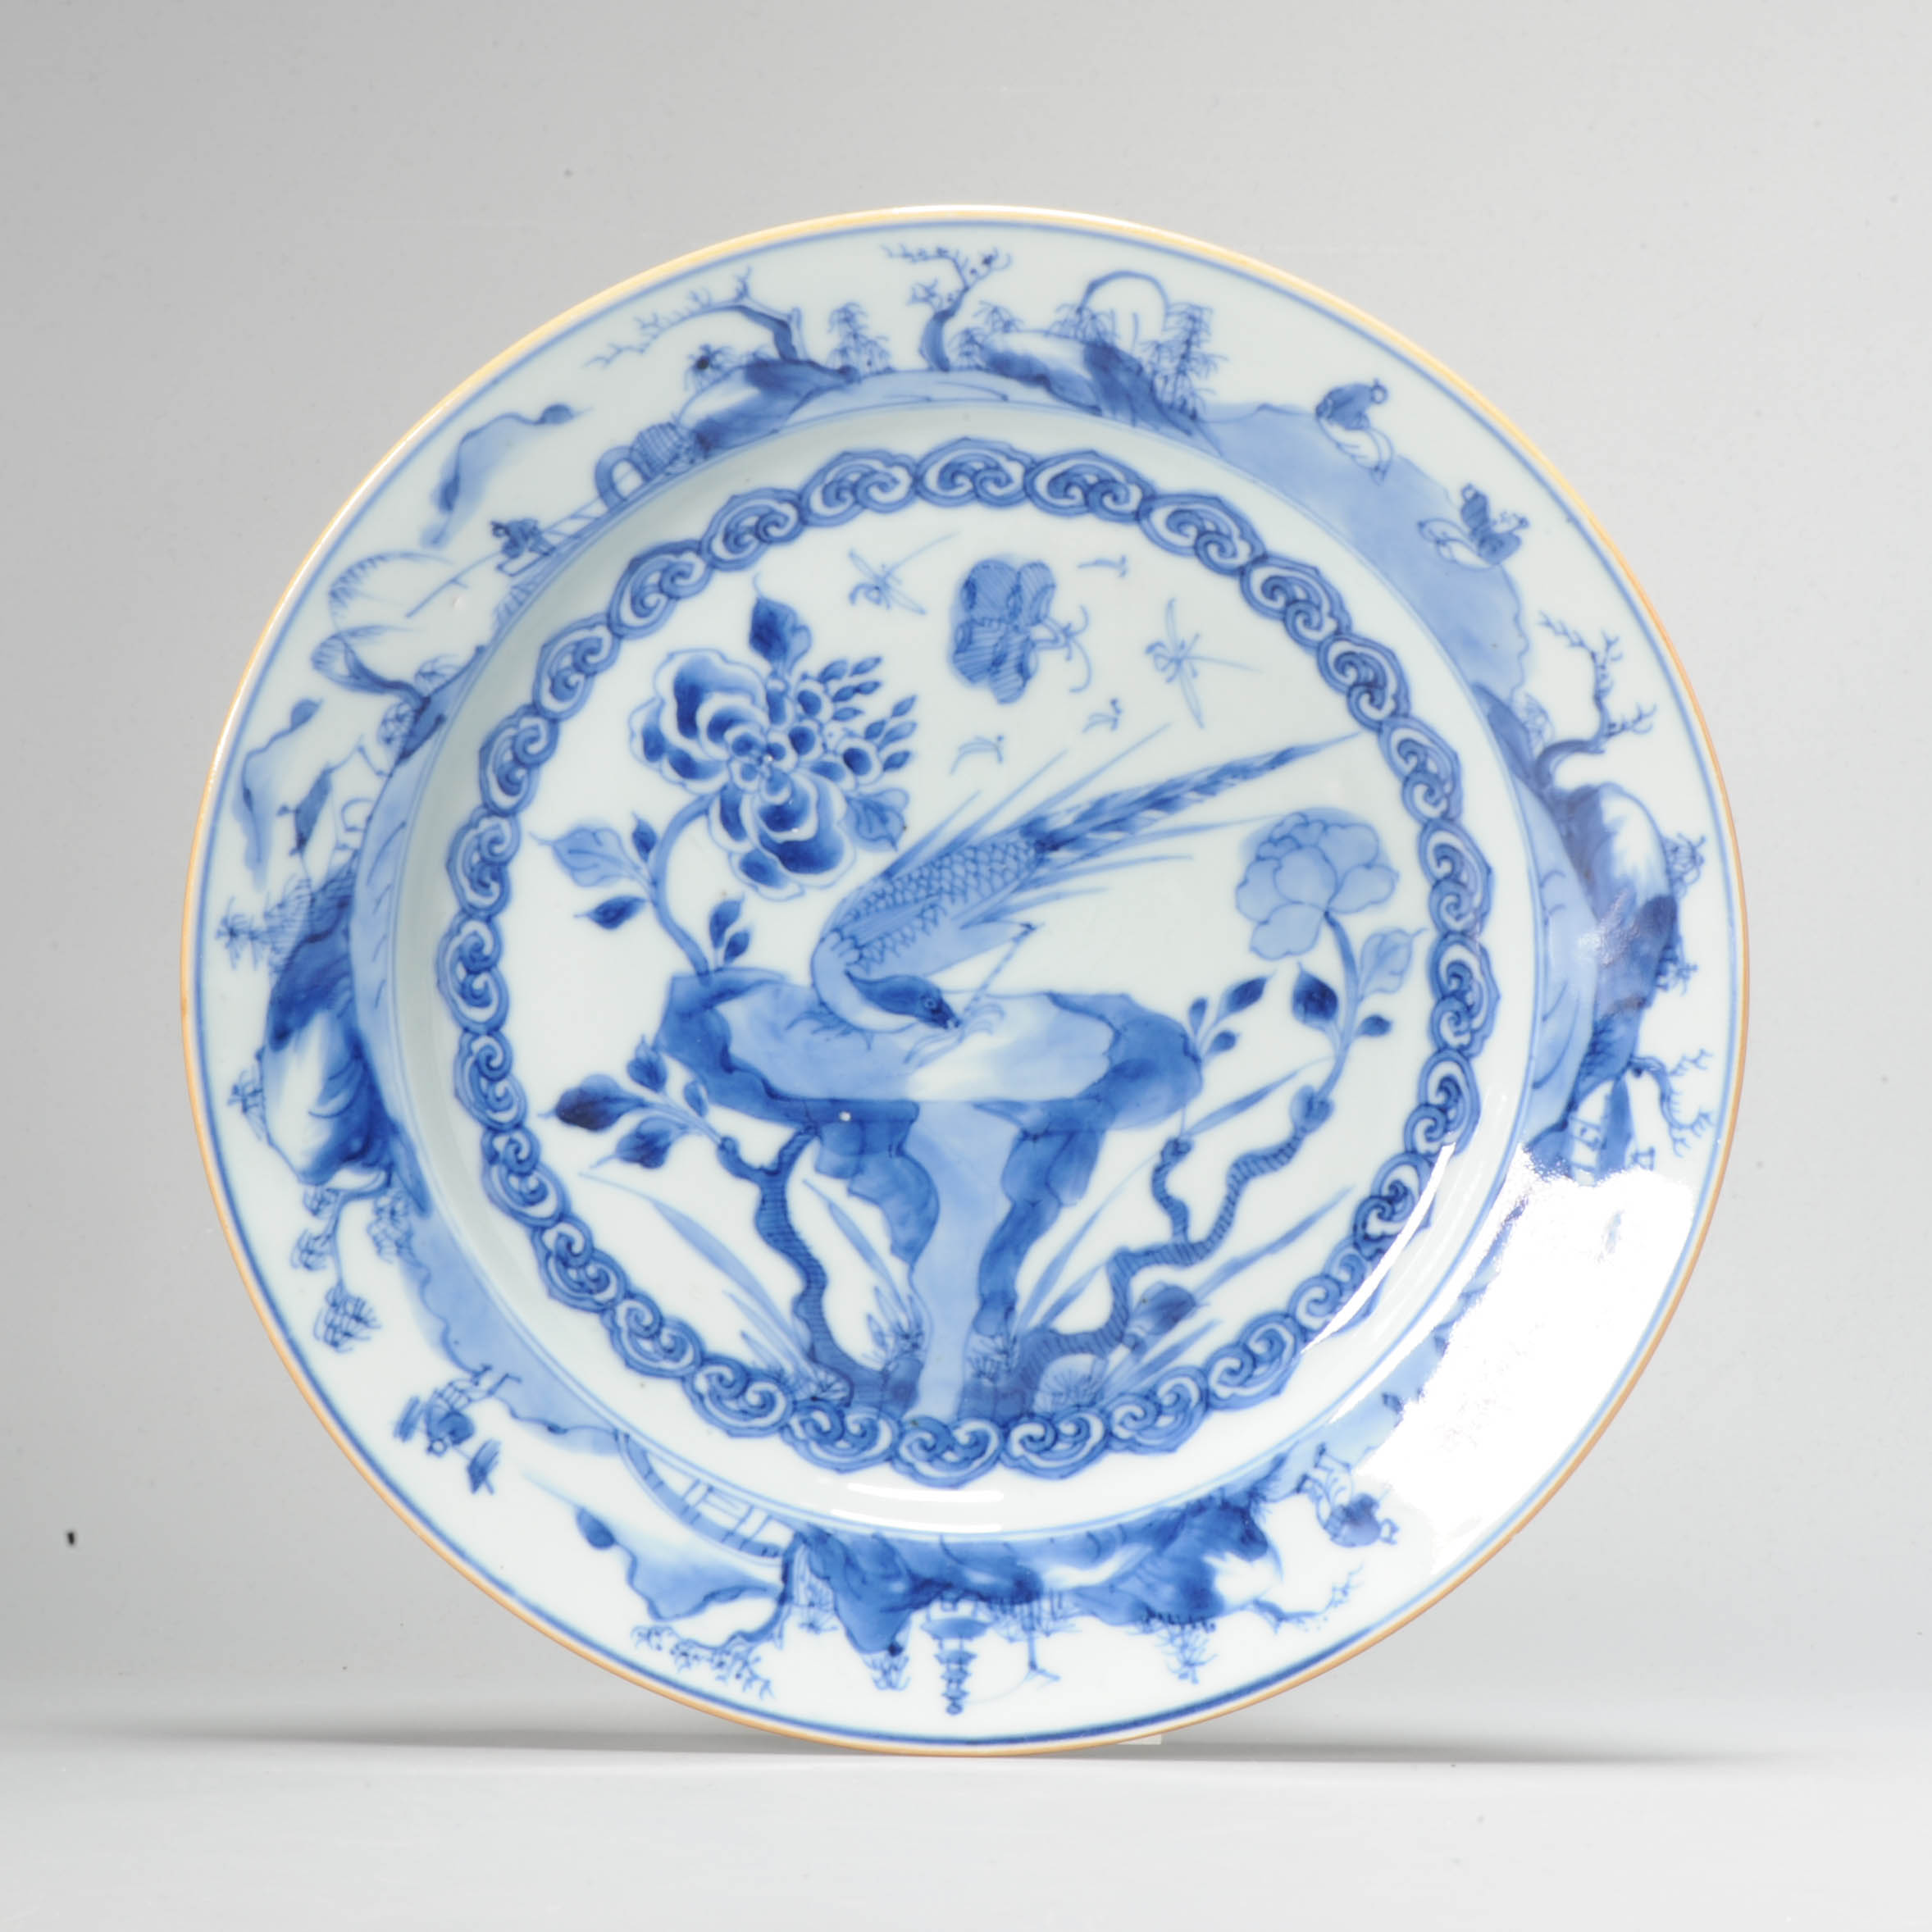 Larger Antique Chinese Porcelain Ca 1720 Kangxi period Period Peacock Plate